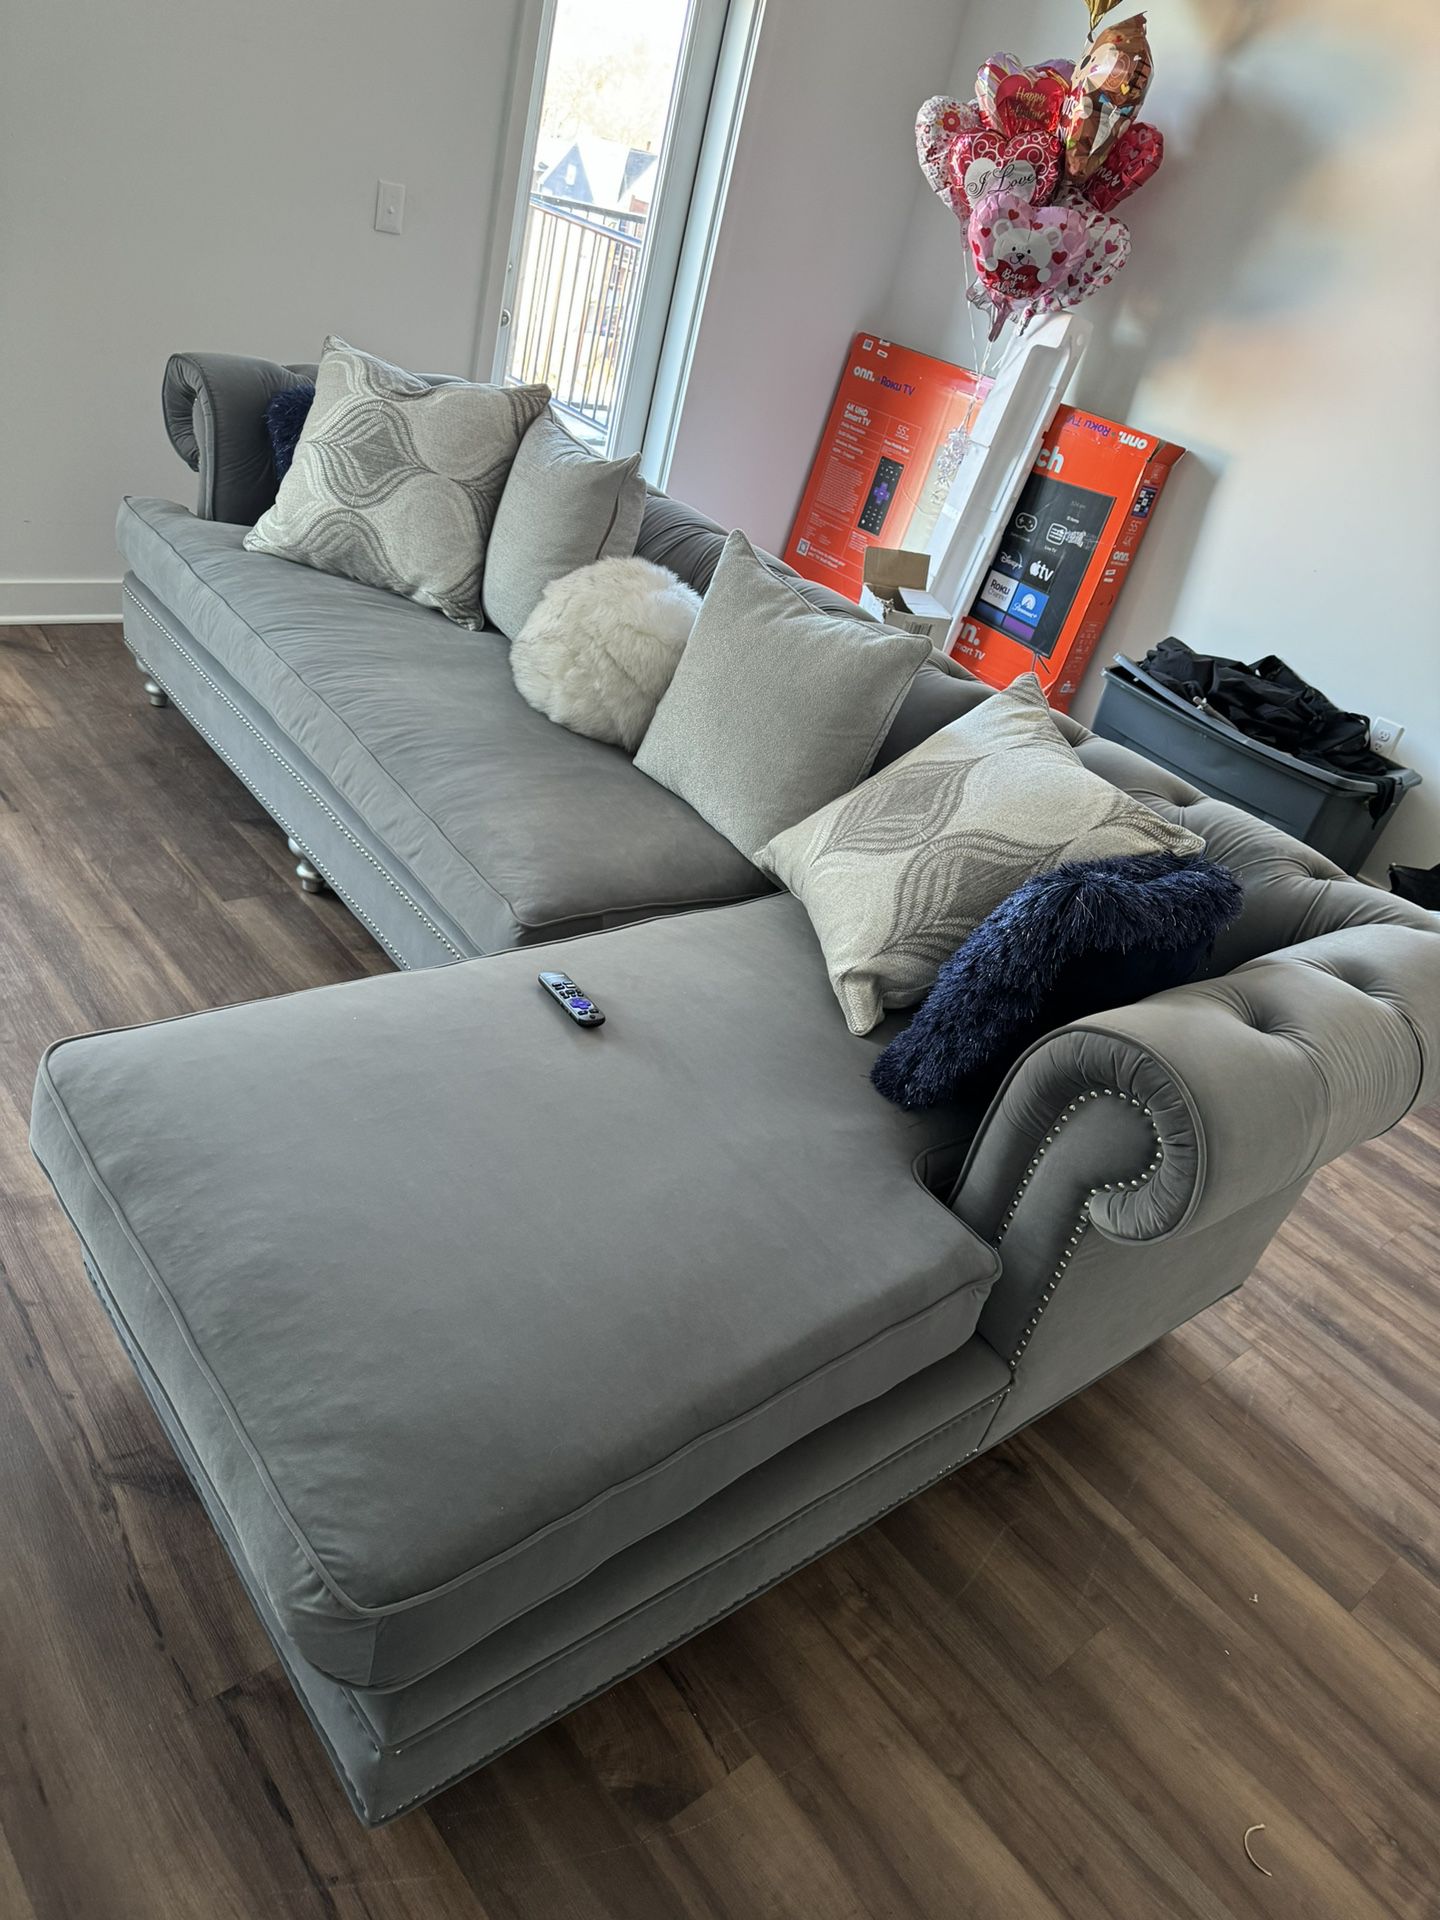 Brand New Sectional Couch For Sale  $850